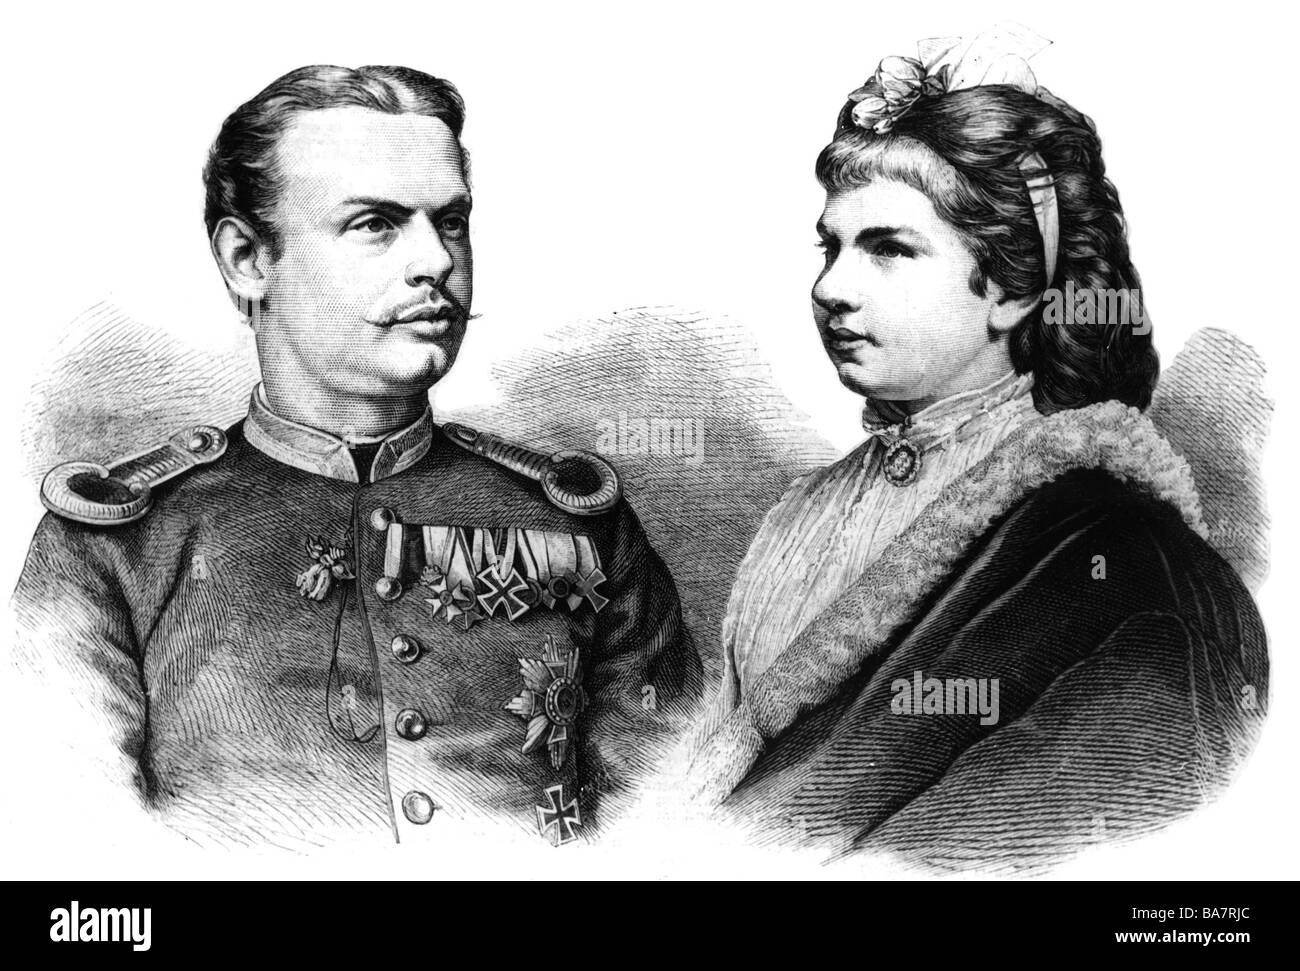 Leopold, 9.2. 1846 - 28.9.1930, Prince of Bavaria, Bavarian general, portrait, with wife Gisela of Austria-Hungary (12.7.1856 - 27.7.1932), wood engraving, published on occasion of their marriage on 20.4.1873, after drawing by F. Weiß, Stock Photo